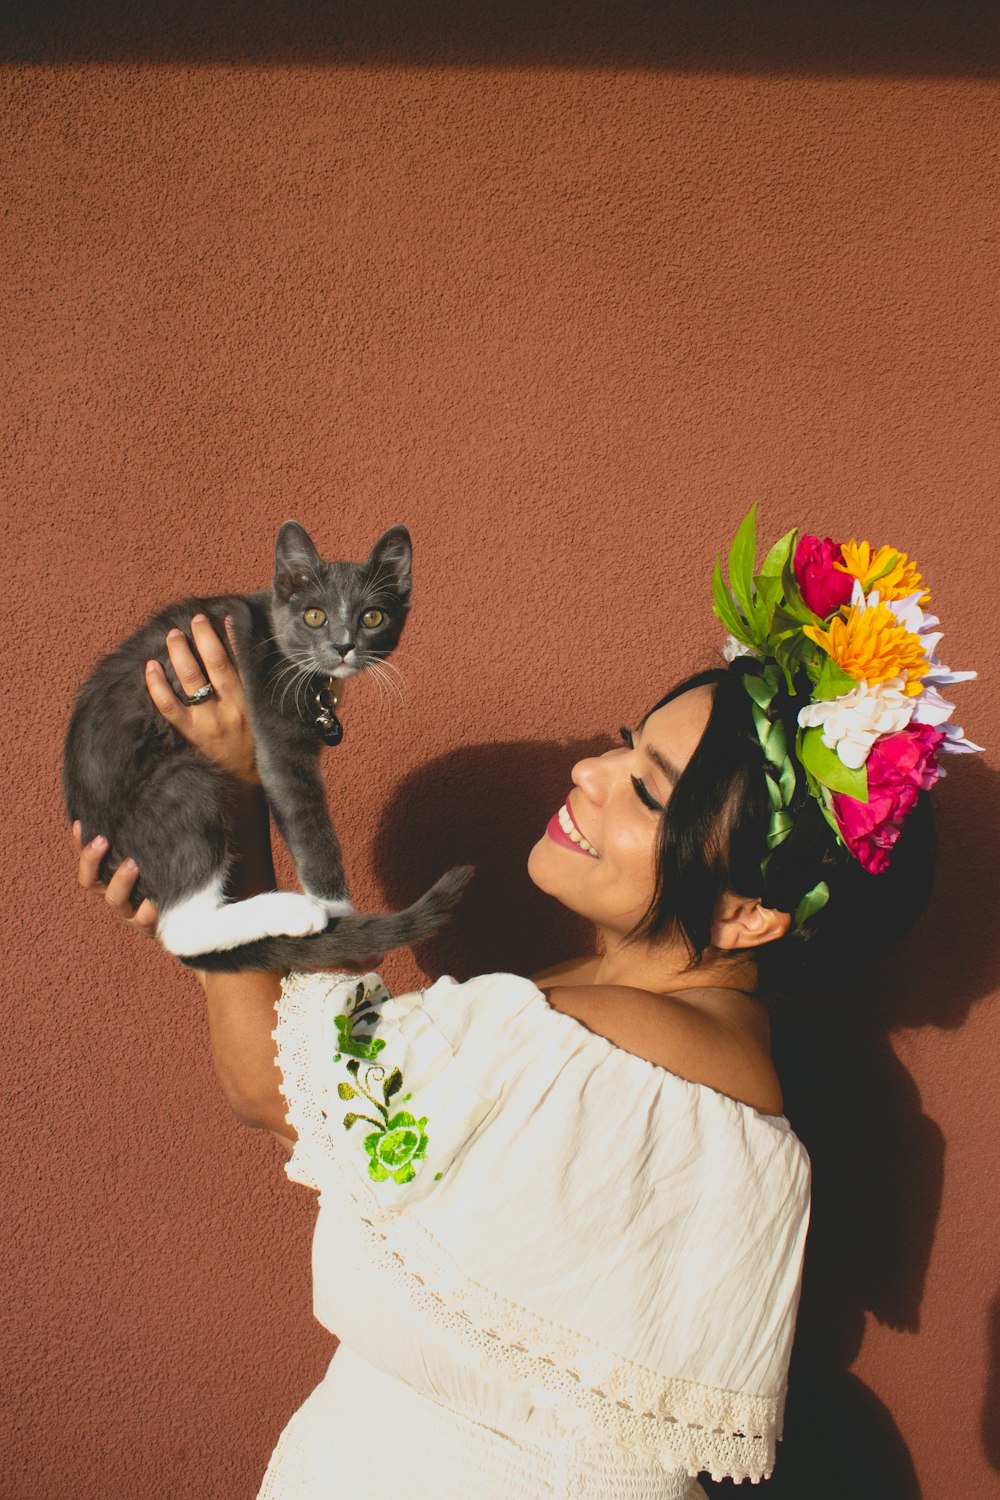 woman in white shirt holding black cat